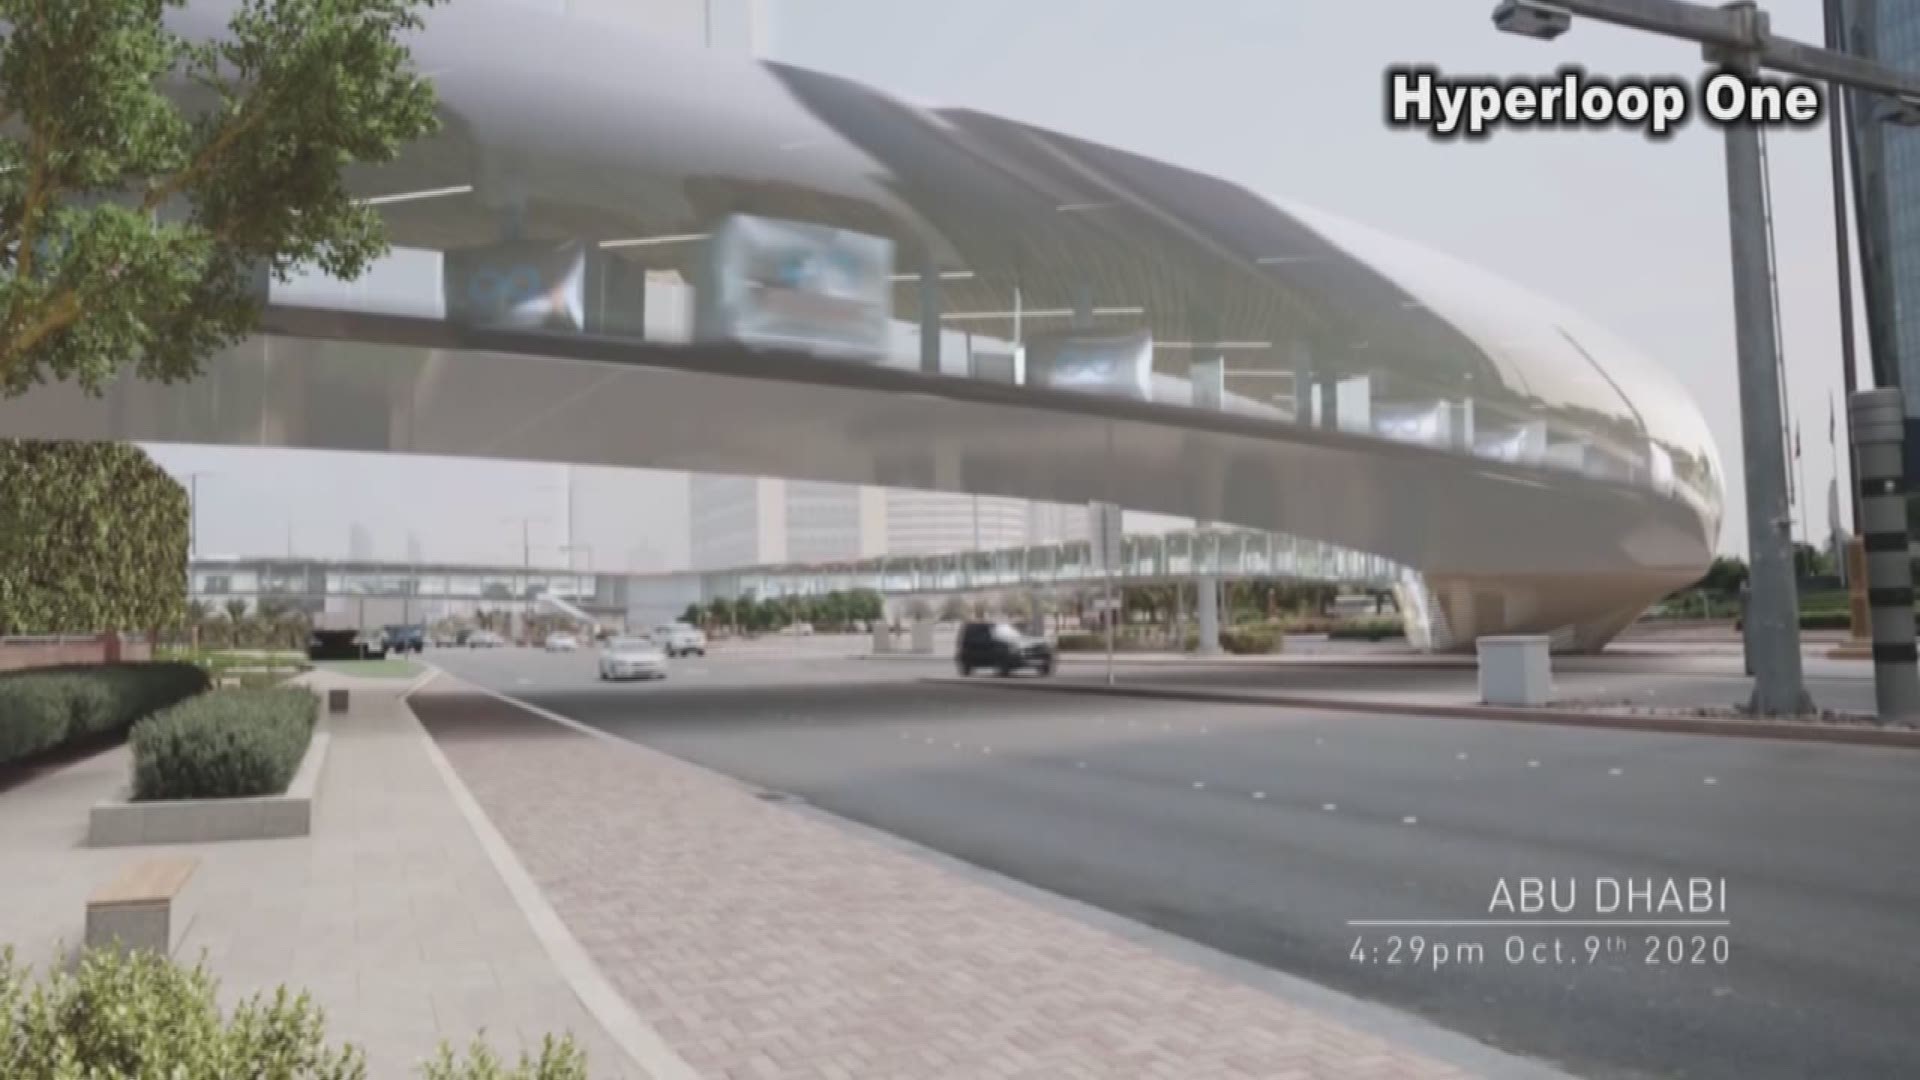 A Hyperloop in Texas is looking more and more real.